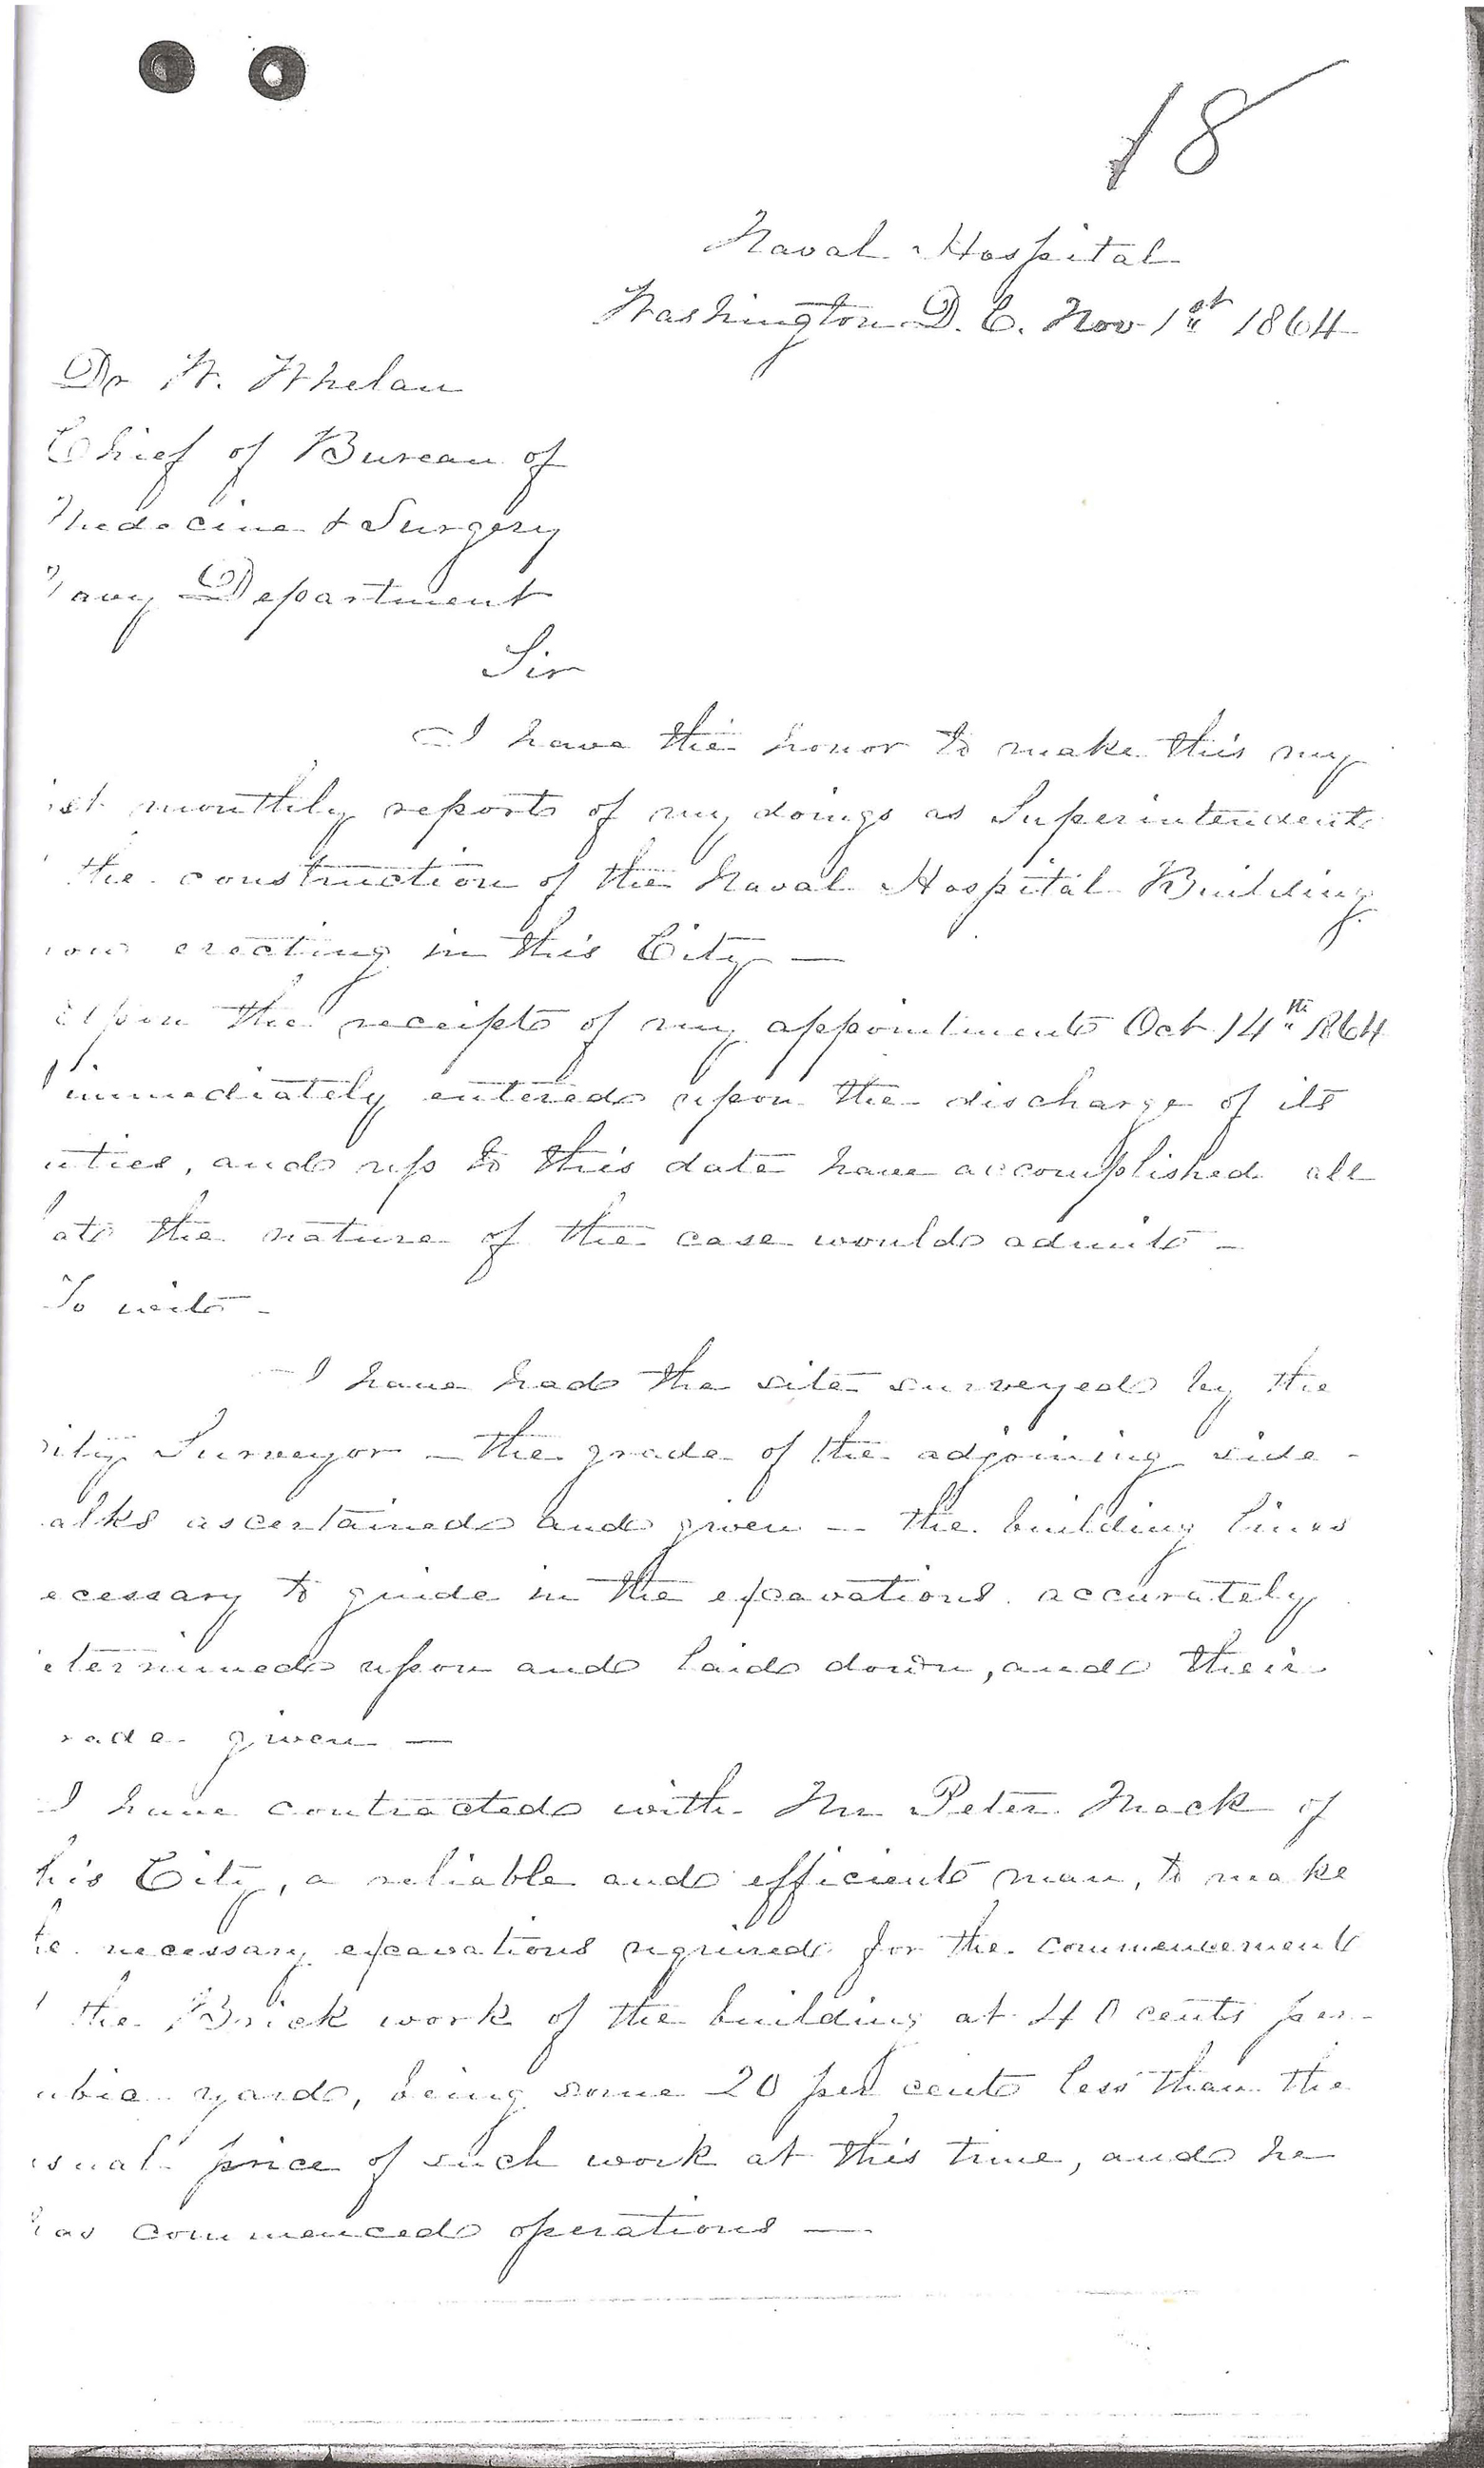 Monthly Report of the Superintendent of Construction, November 1, 1864, Page 1 of 3